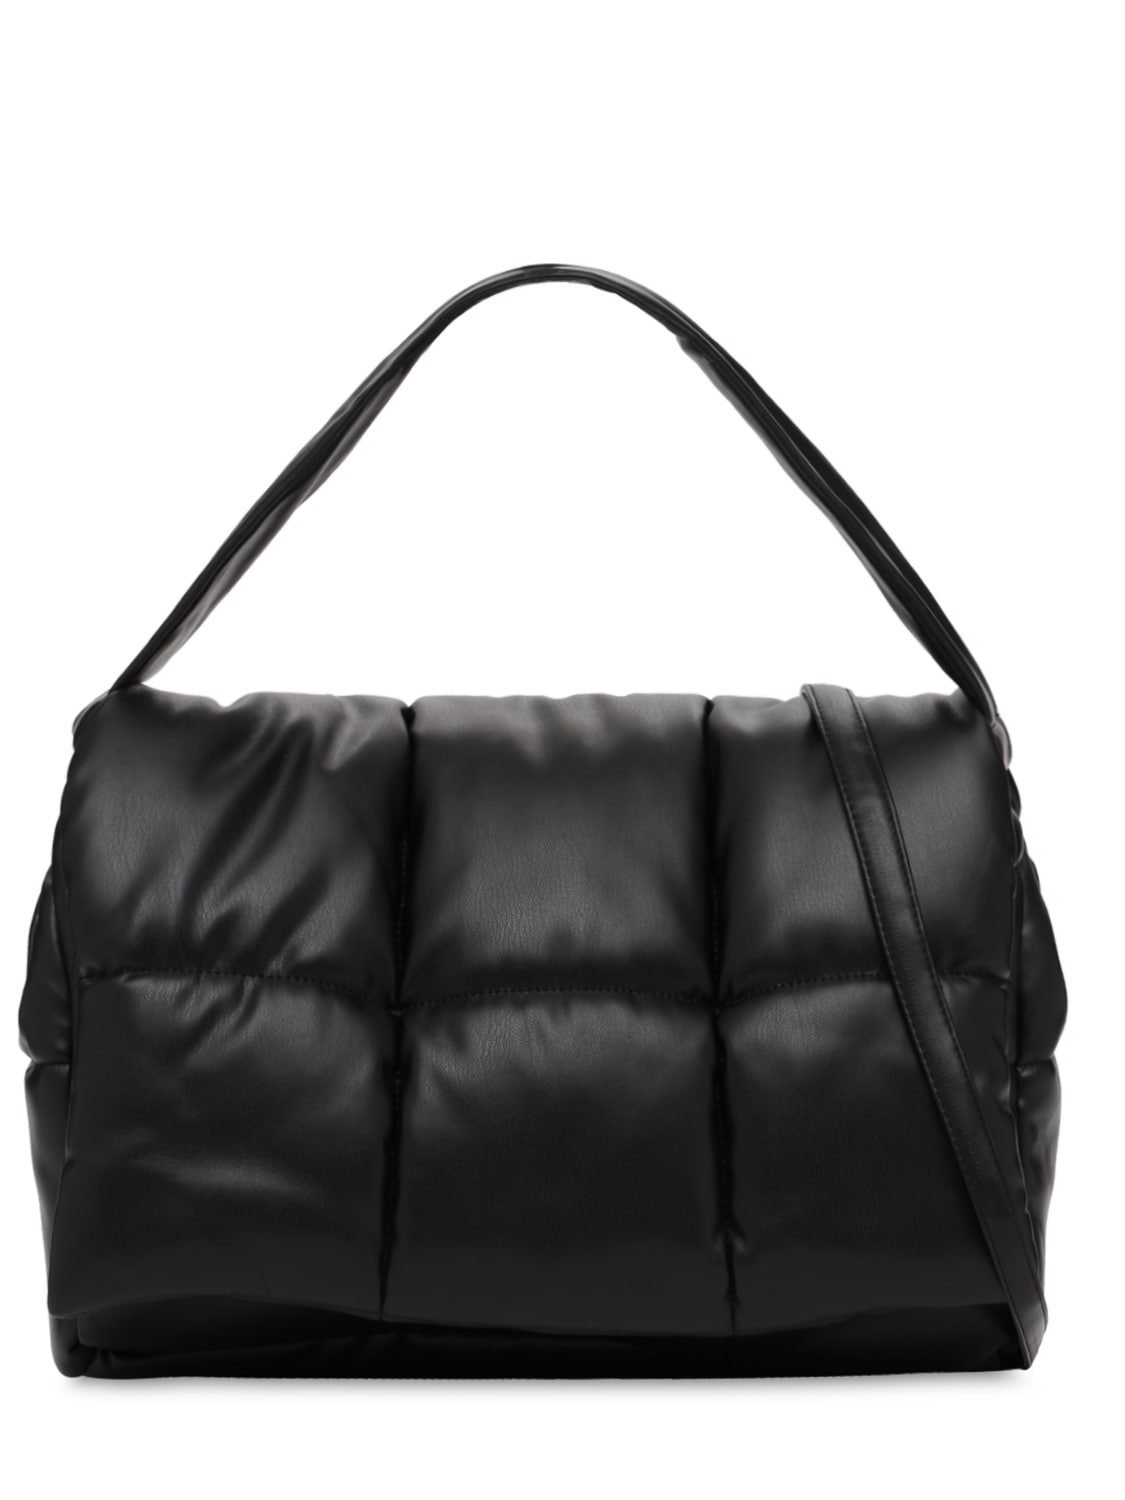 Stand Studio Wanda Quilted Leather Bag In Black